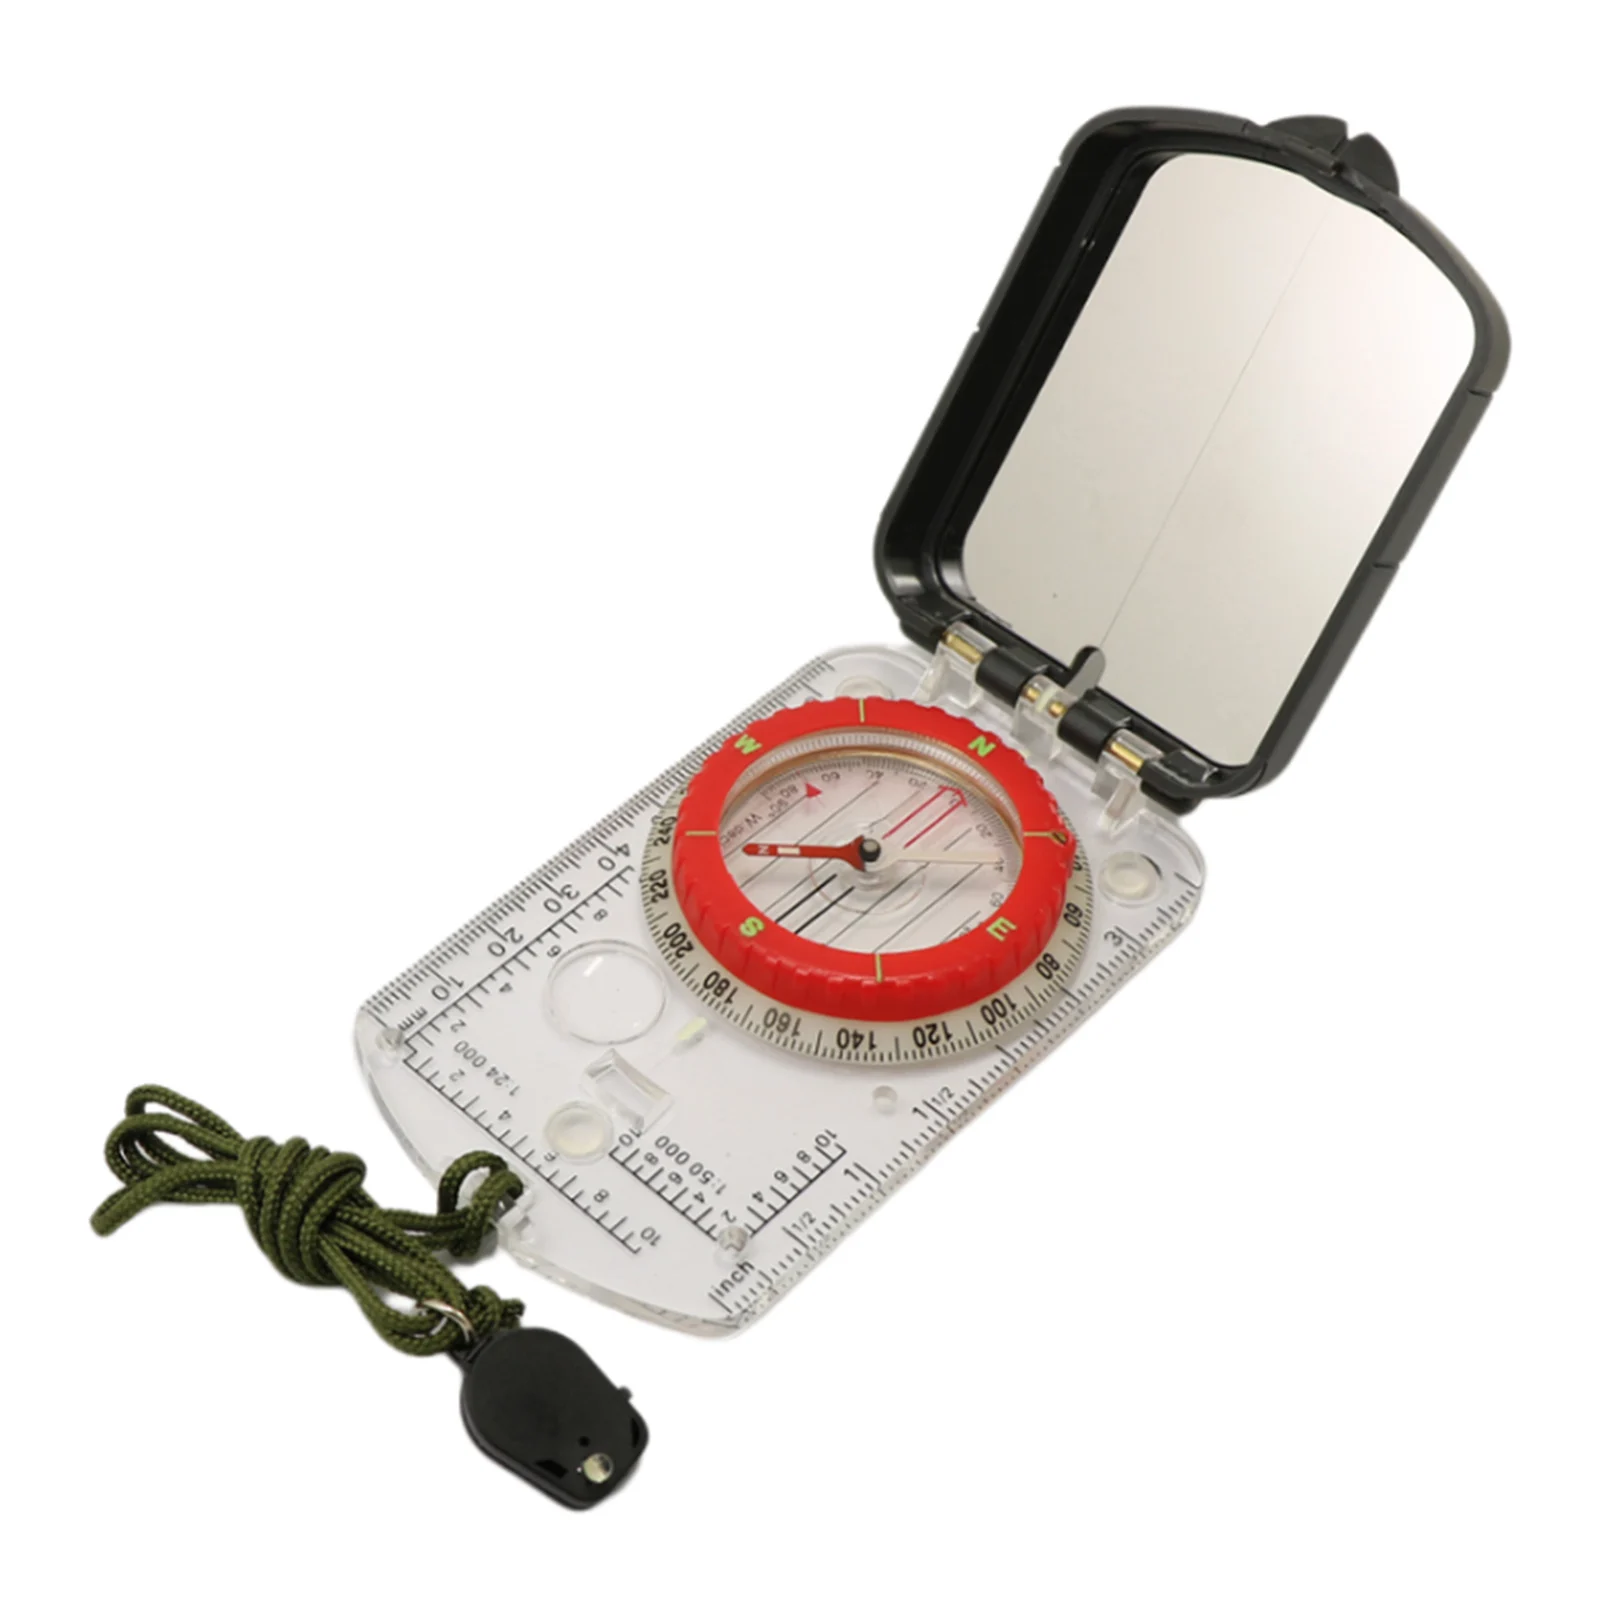  Sighting Compass Map Ruler Outdoor Camping Hunting Hiking Backpacking